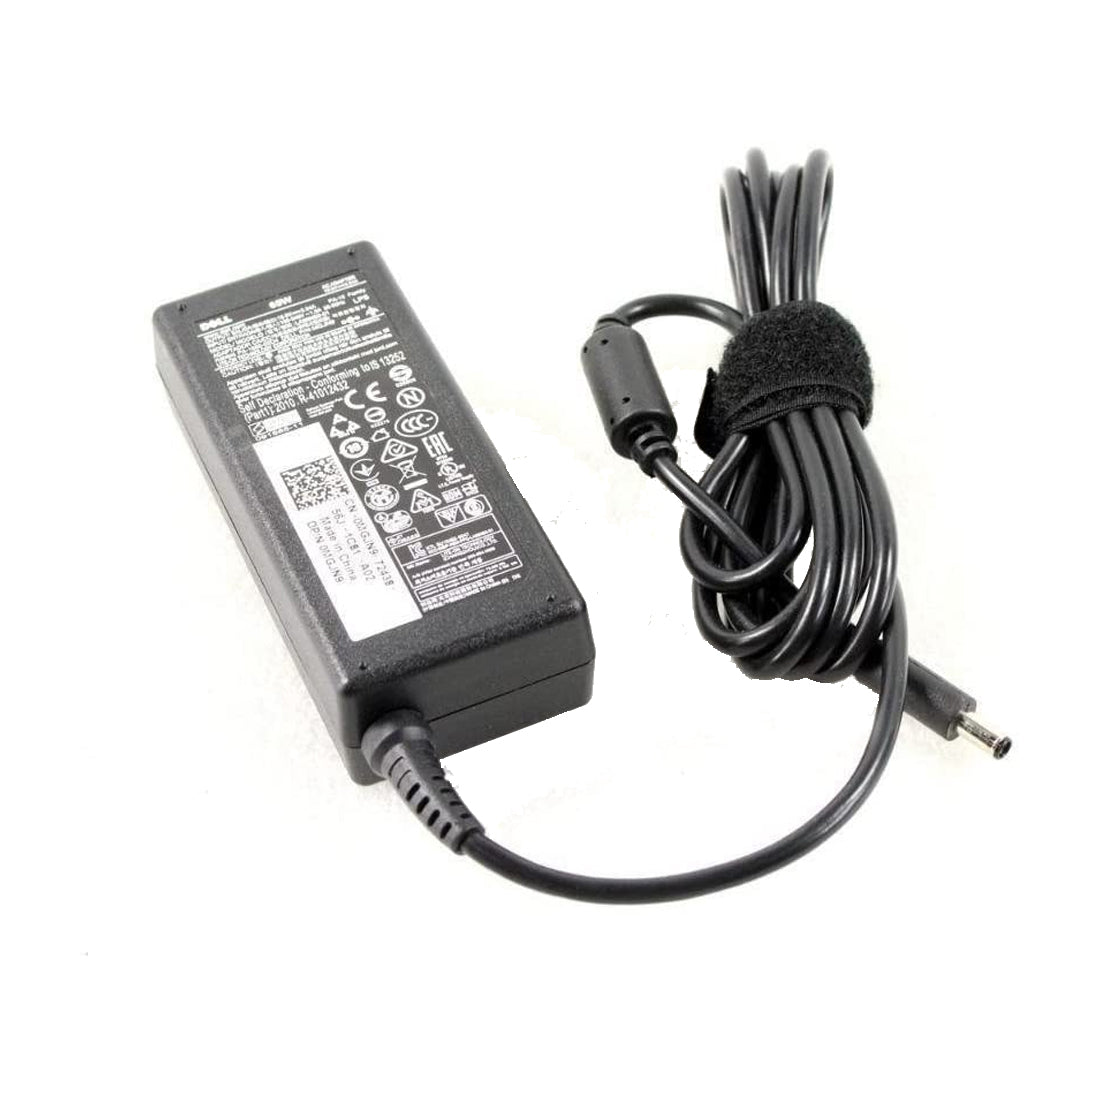 Dell Original 65W 19.5V 4.5mm Pin Laptop Charger Adapter for Inspiron 15 3590 With Power Cord